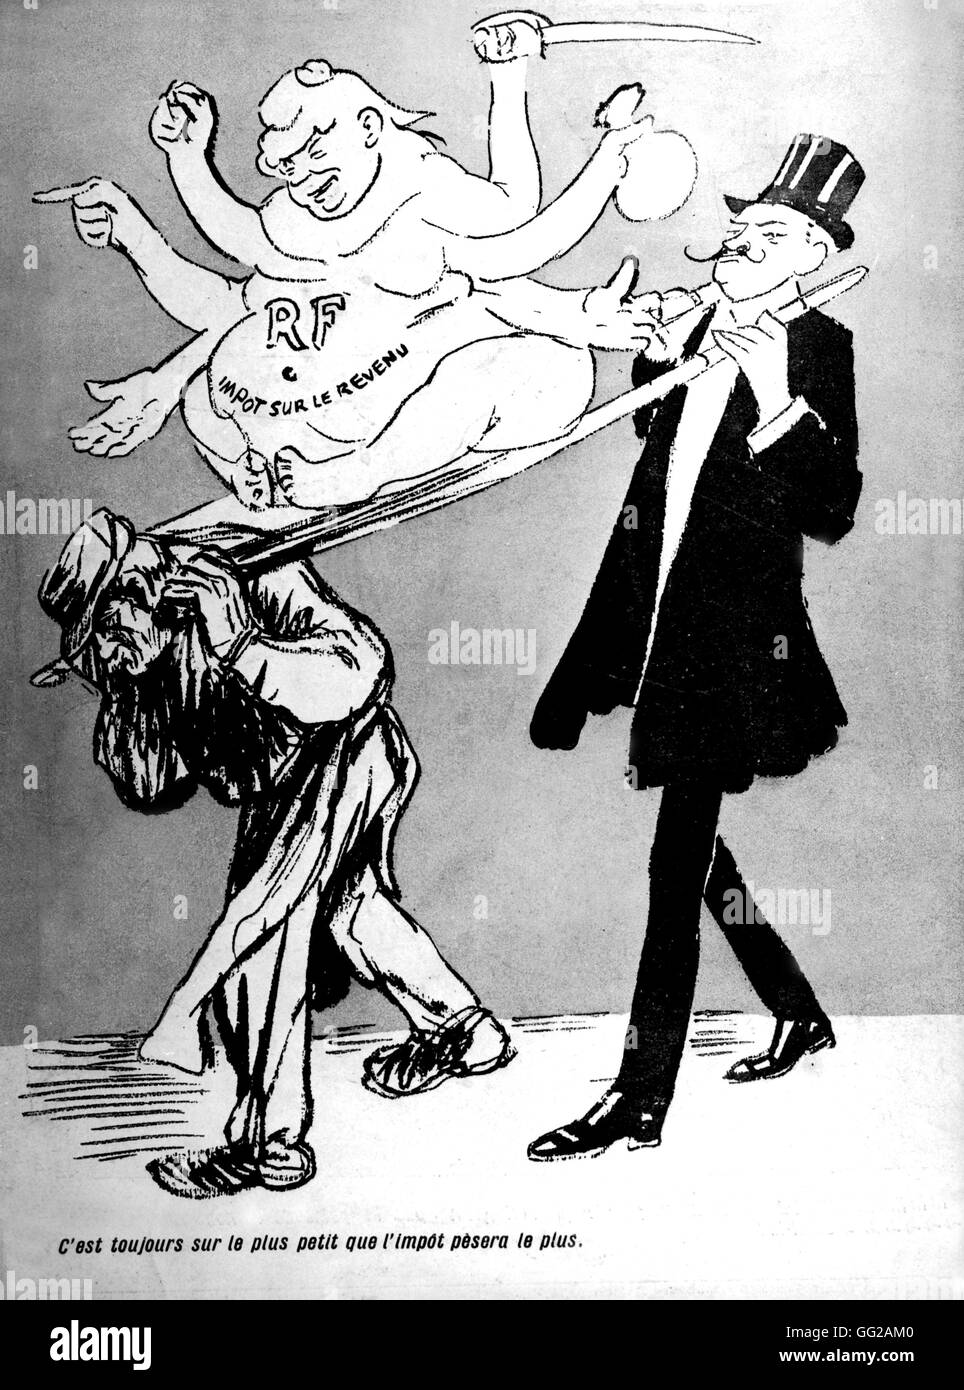 The weakest person is always the one who suffer most from the taxes Caricature published in 'L'Assiette au beurre' 1907 France Stock Photo